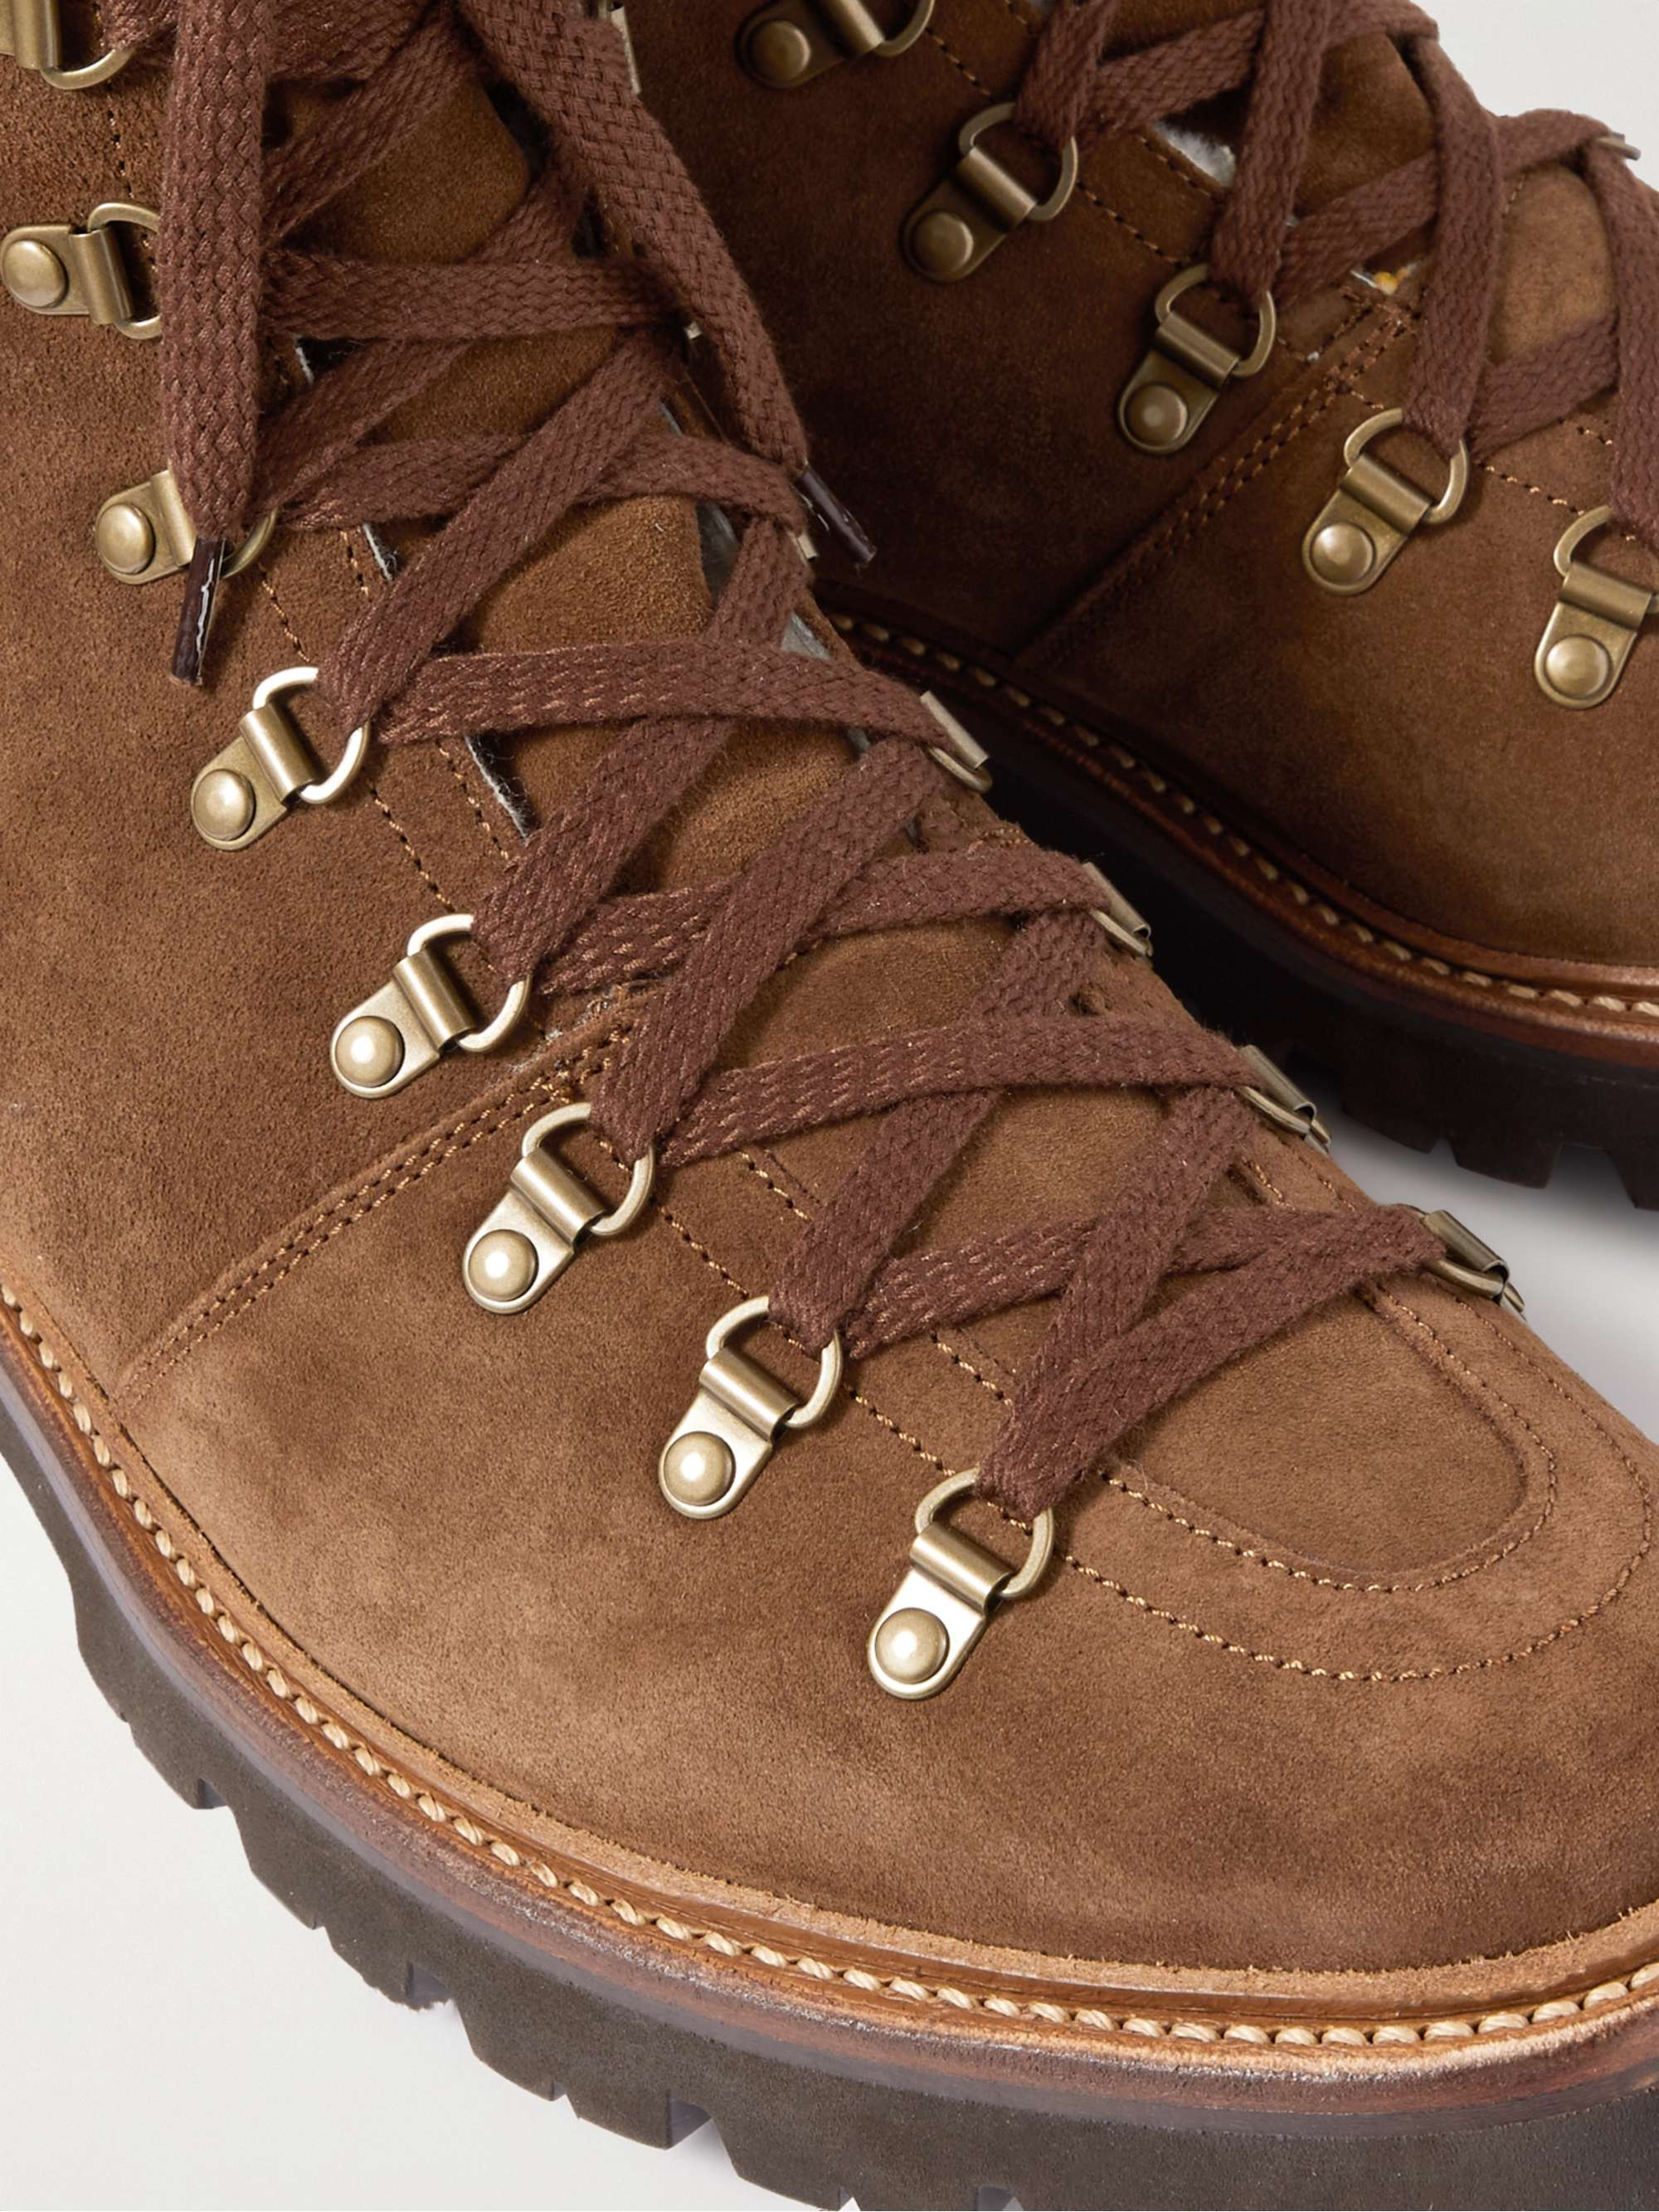 GRENSON Brady Shearling-Lined Suede Boots